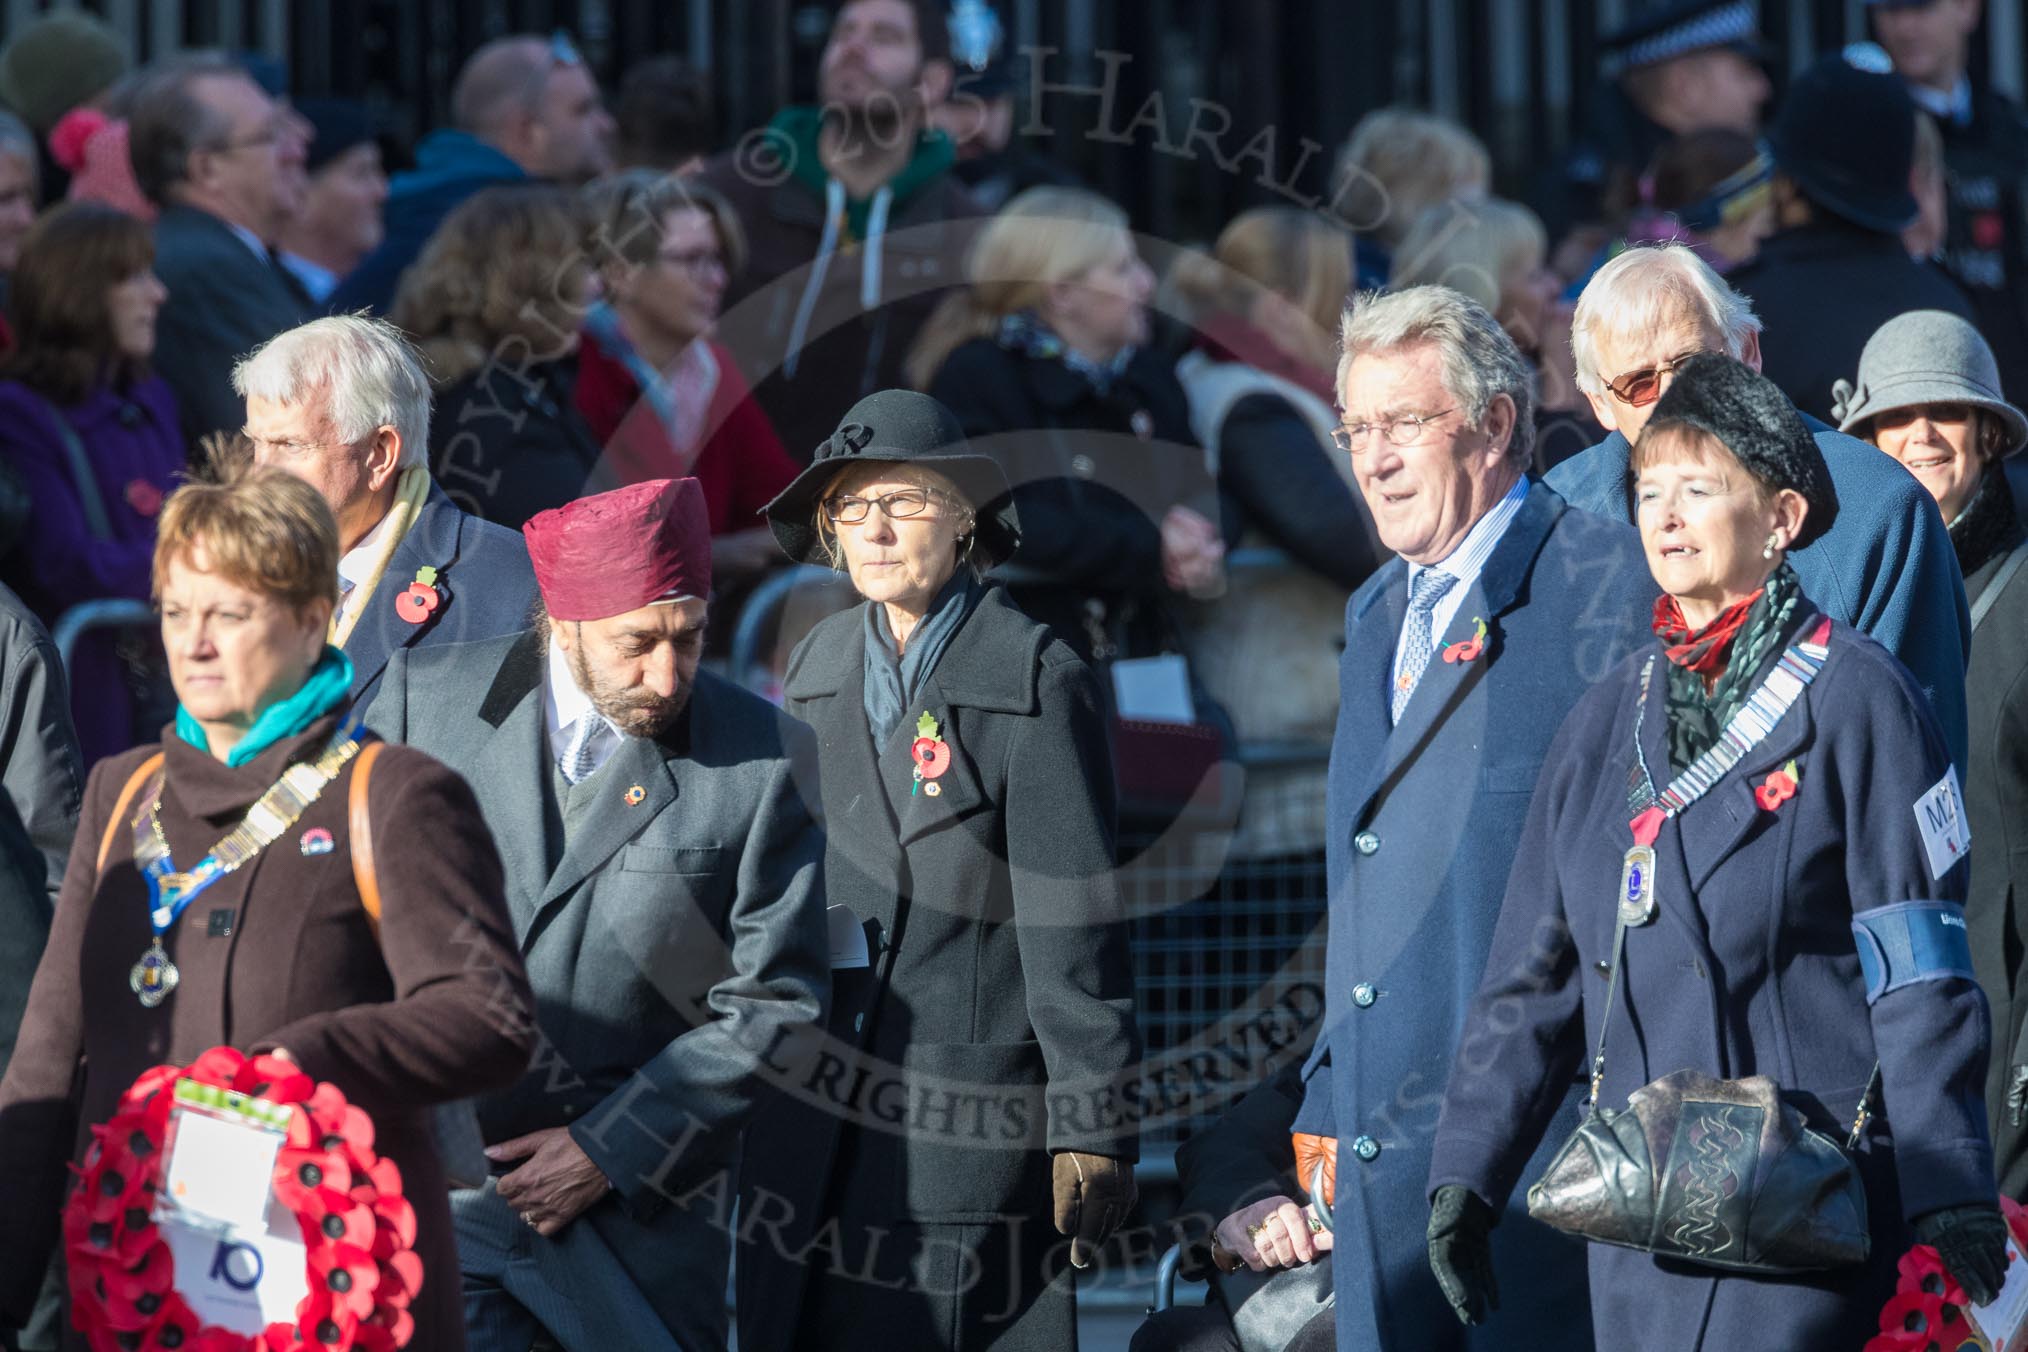 March Past, Remembrance Sunday at the Cenotaph 2016: M28 Lions Club International.
Cenotaph, Whitehall, London SW1,
London,
Greater London,
United Kingdom,
on 13 November 2016 at 13:17, image #2732